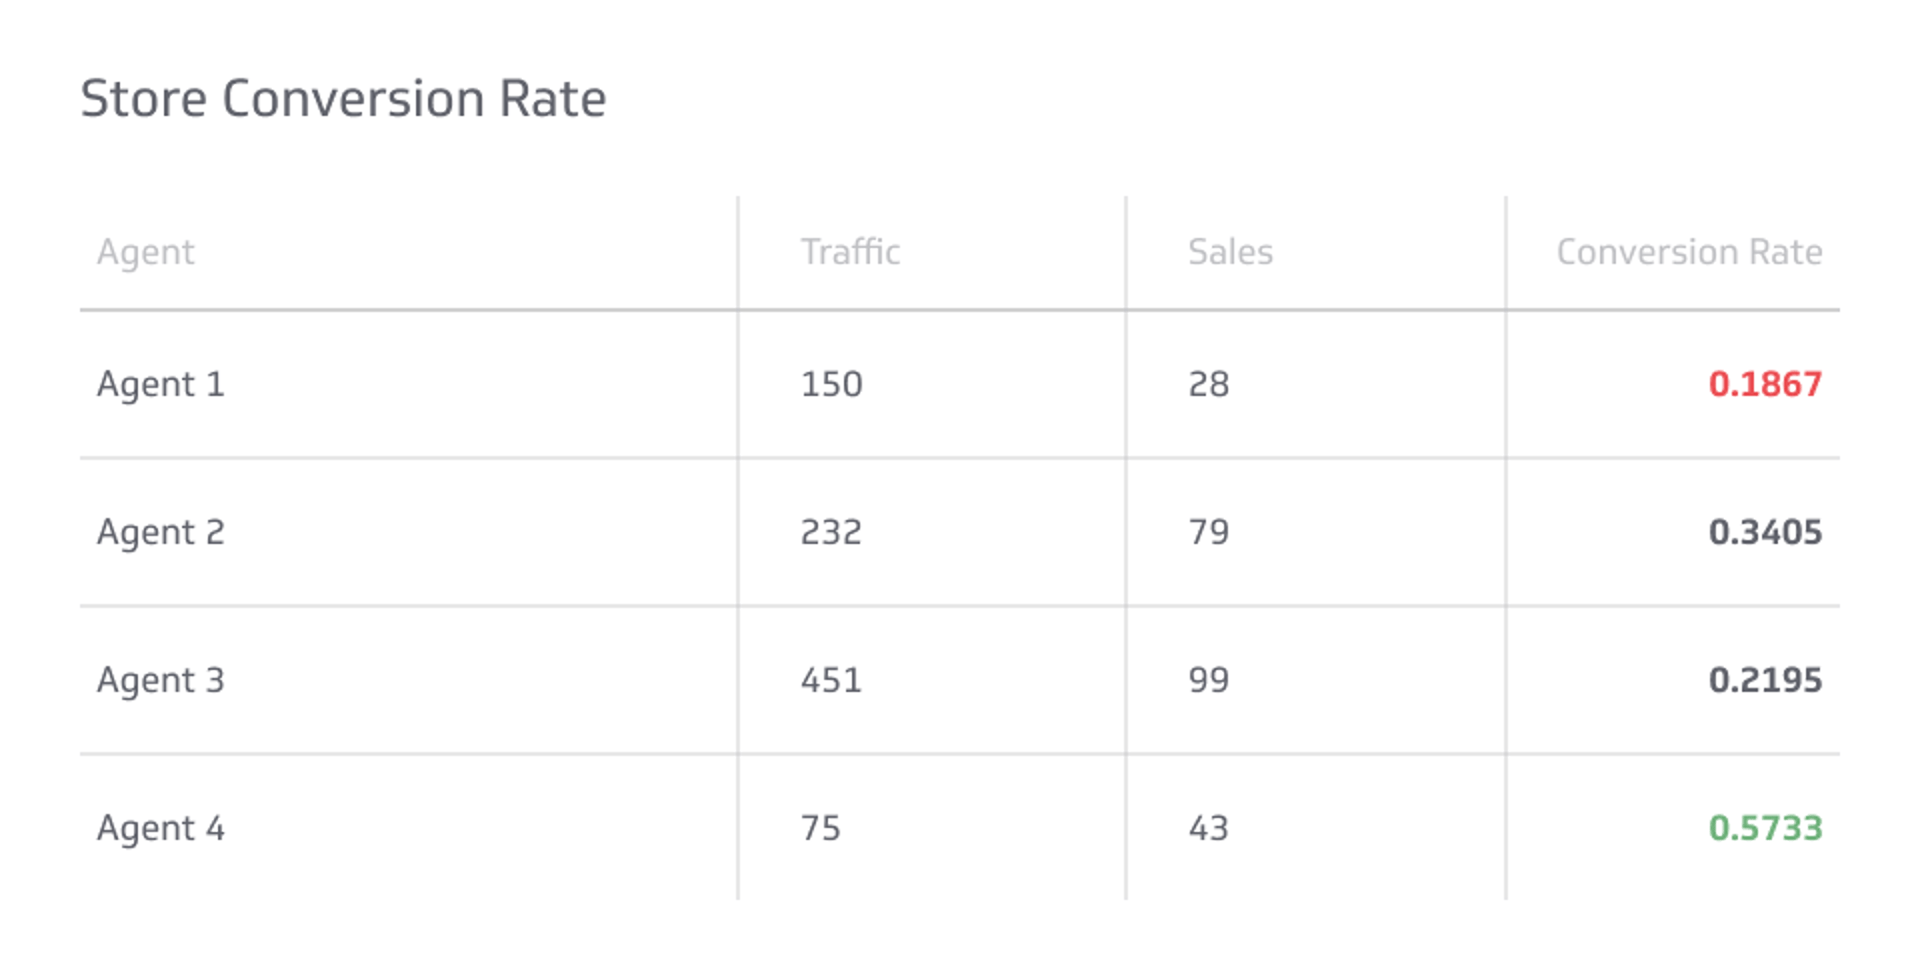 Related KPI Examples - Store Conversion Rate Metric